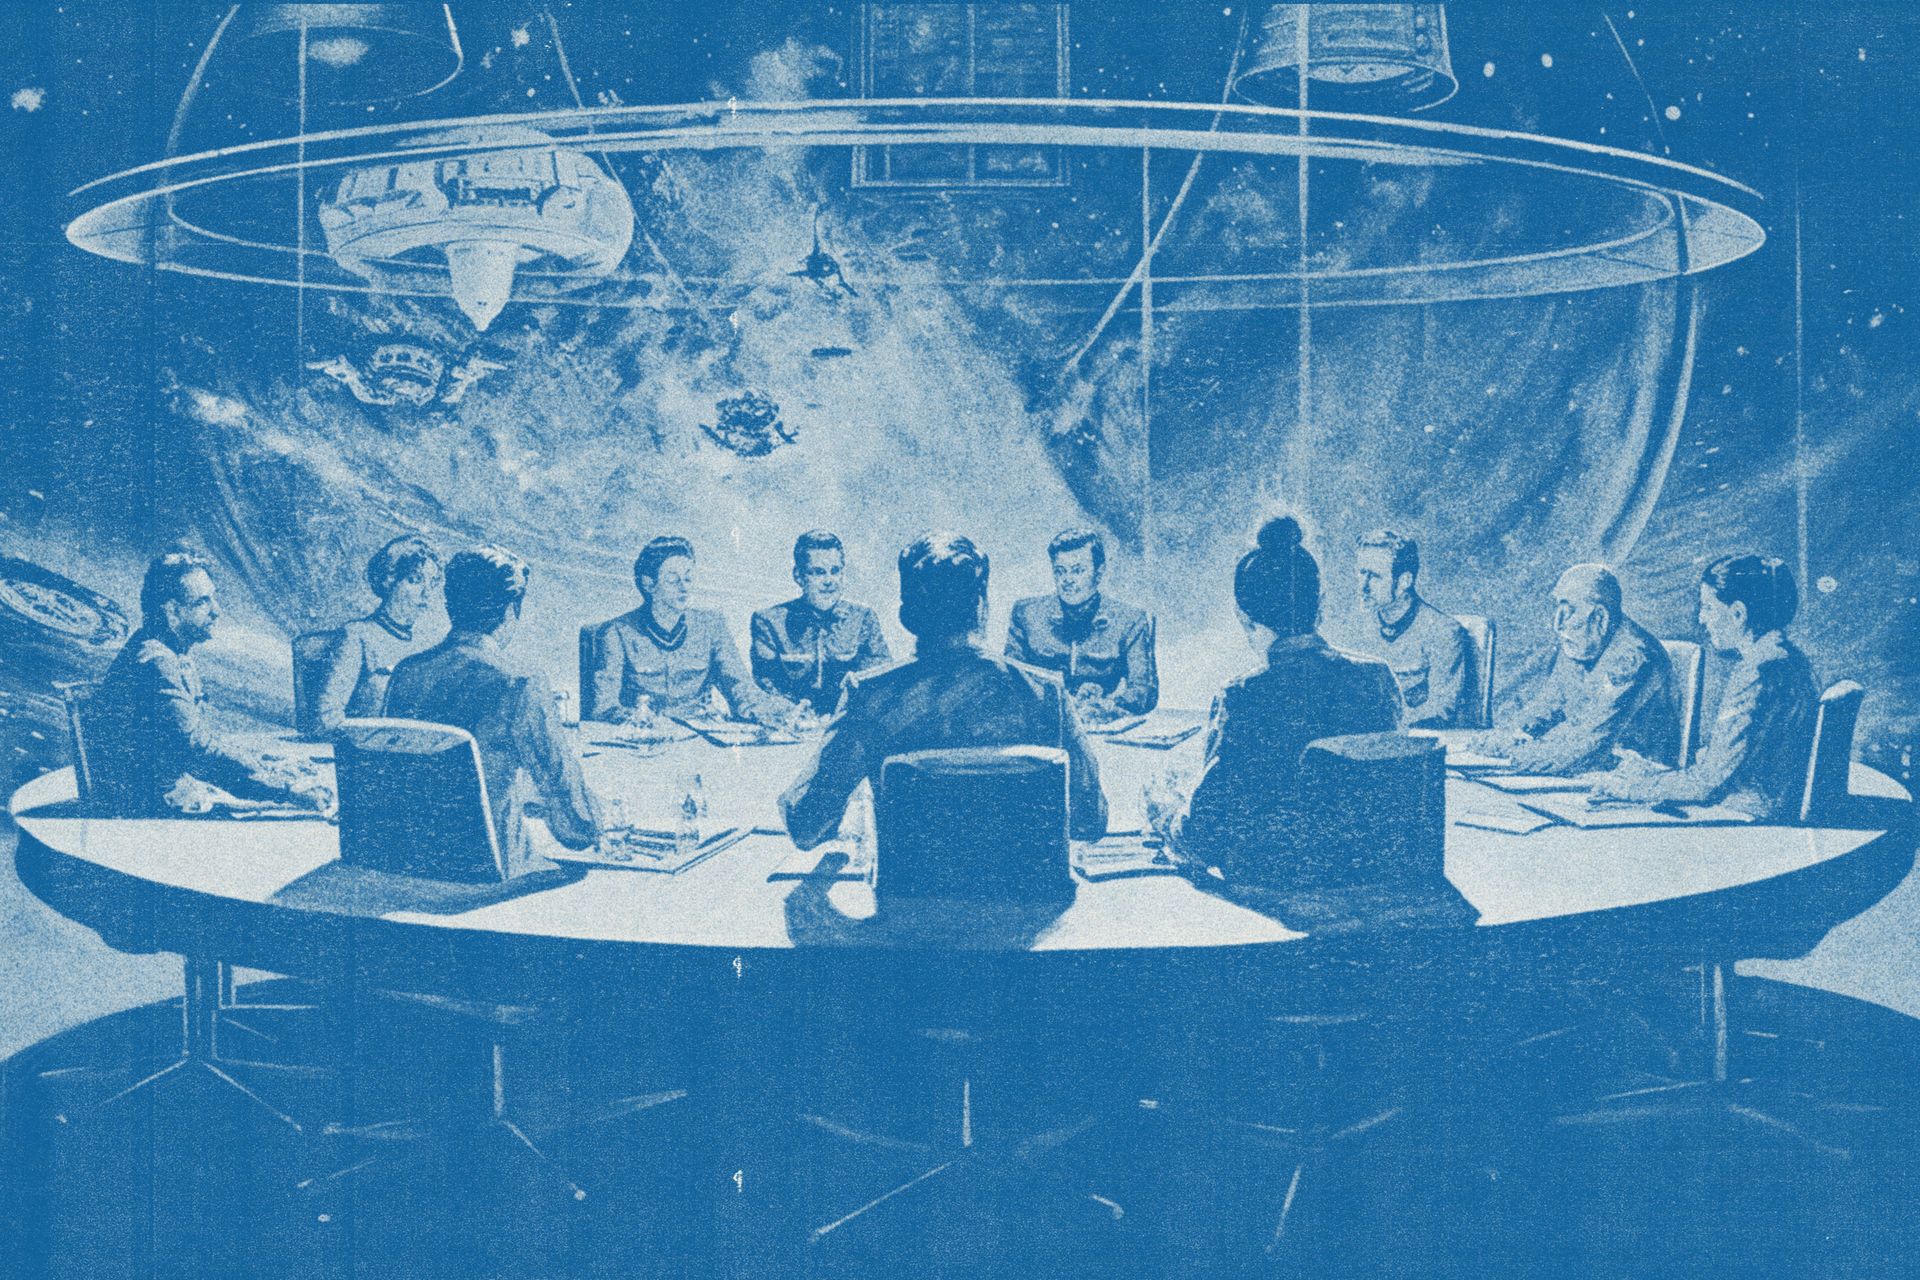 A group of people in a futuristic setting having a meeting at a round table with a space background.